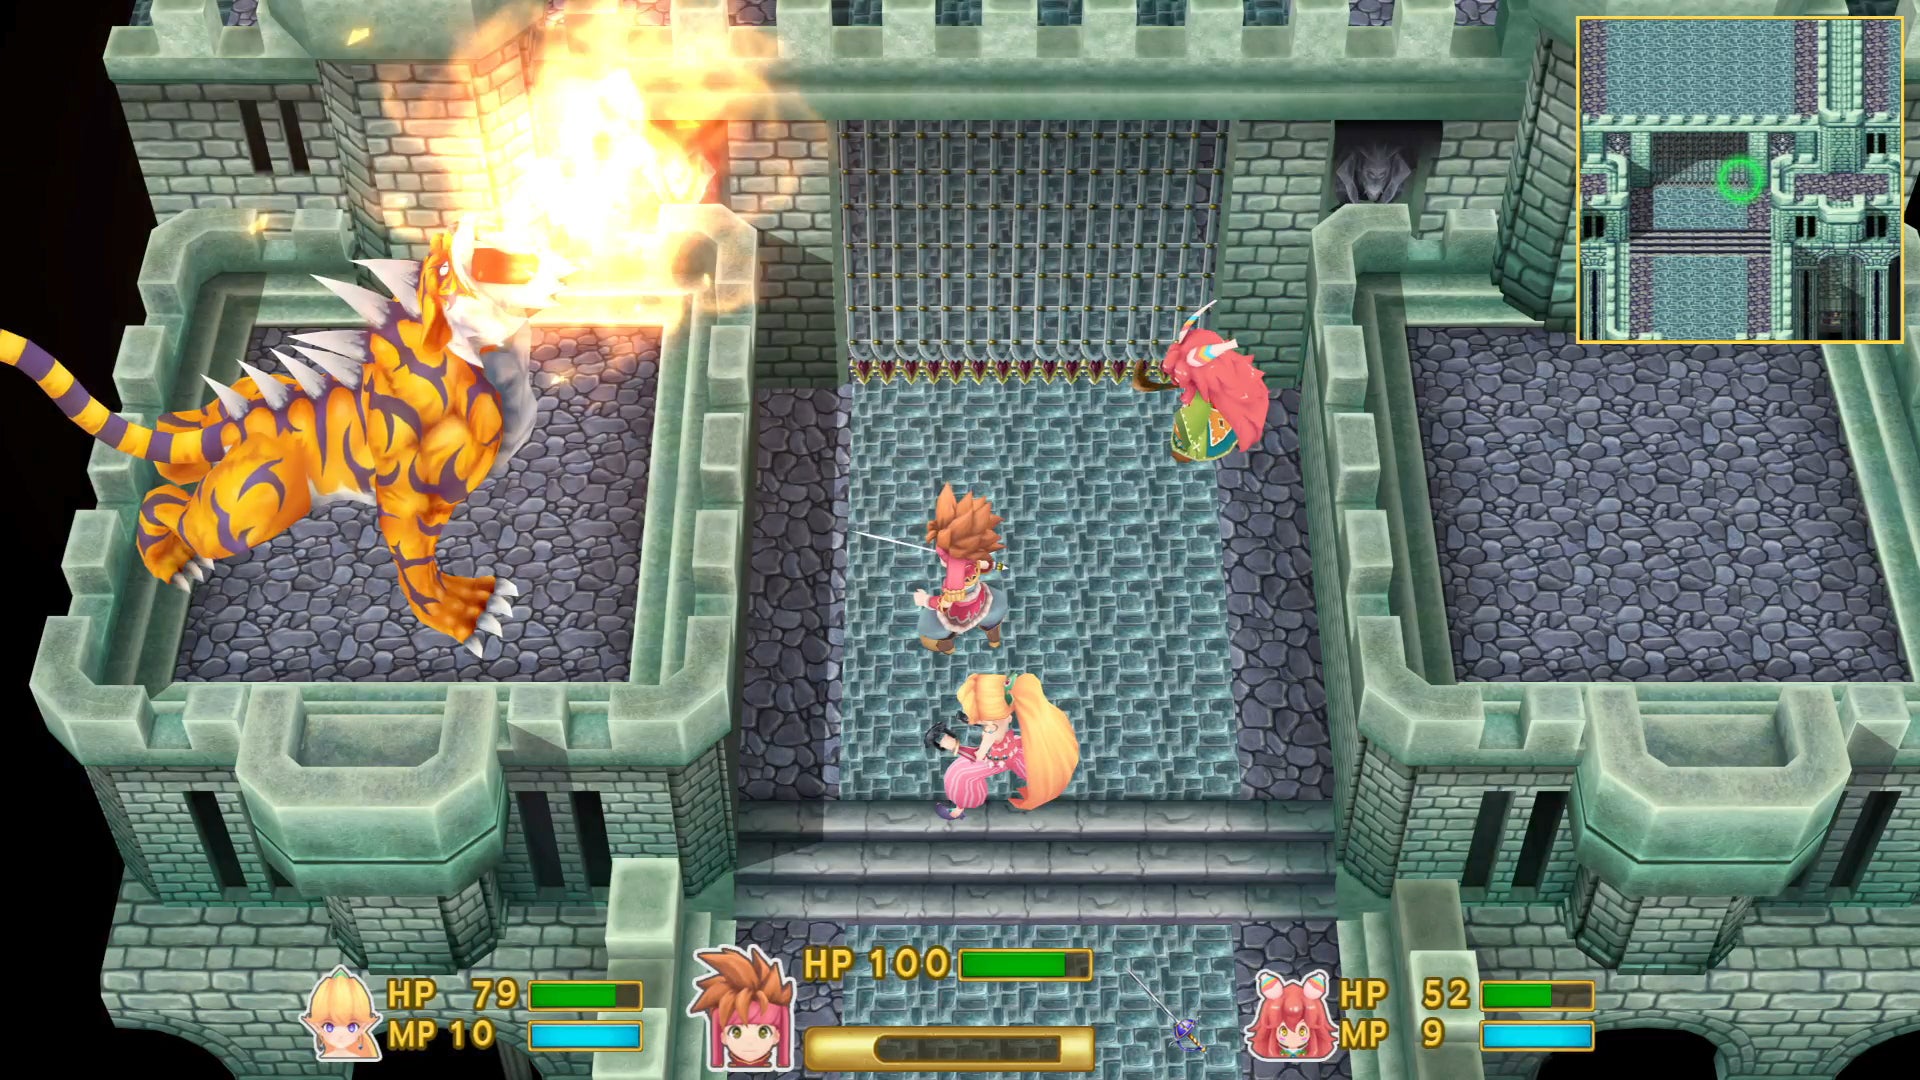 Screenshot of Secret of Mana gameplay with characters fighting a boss.